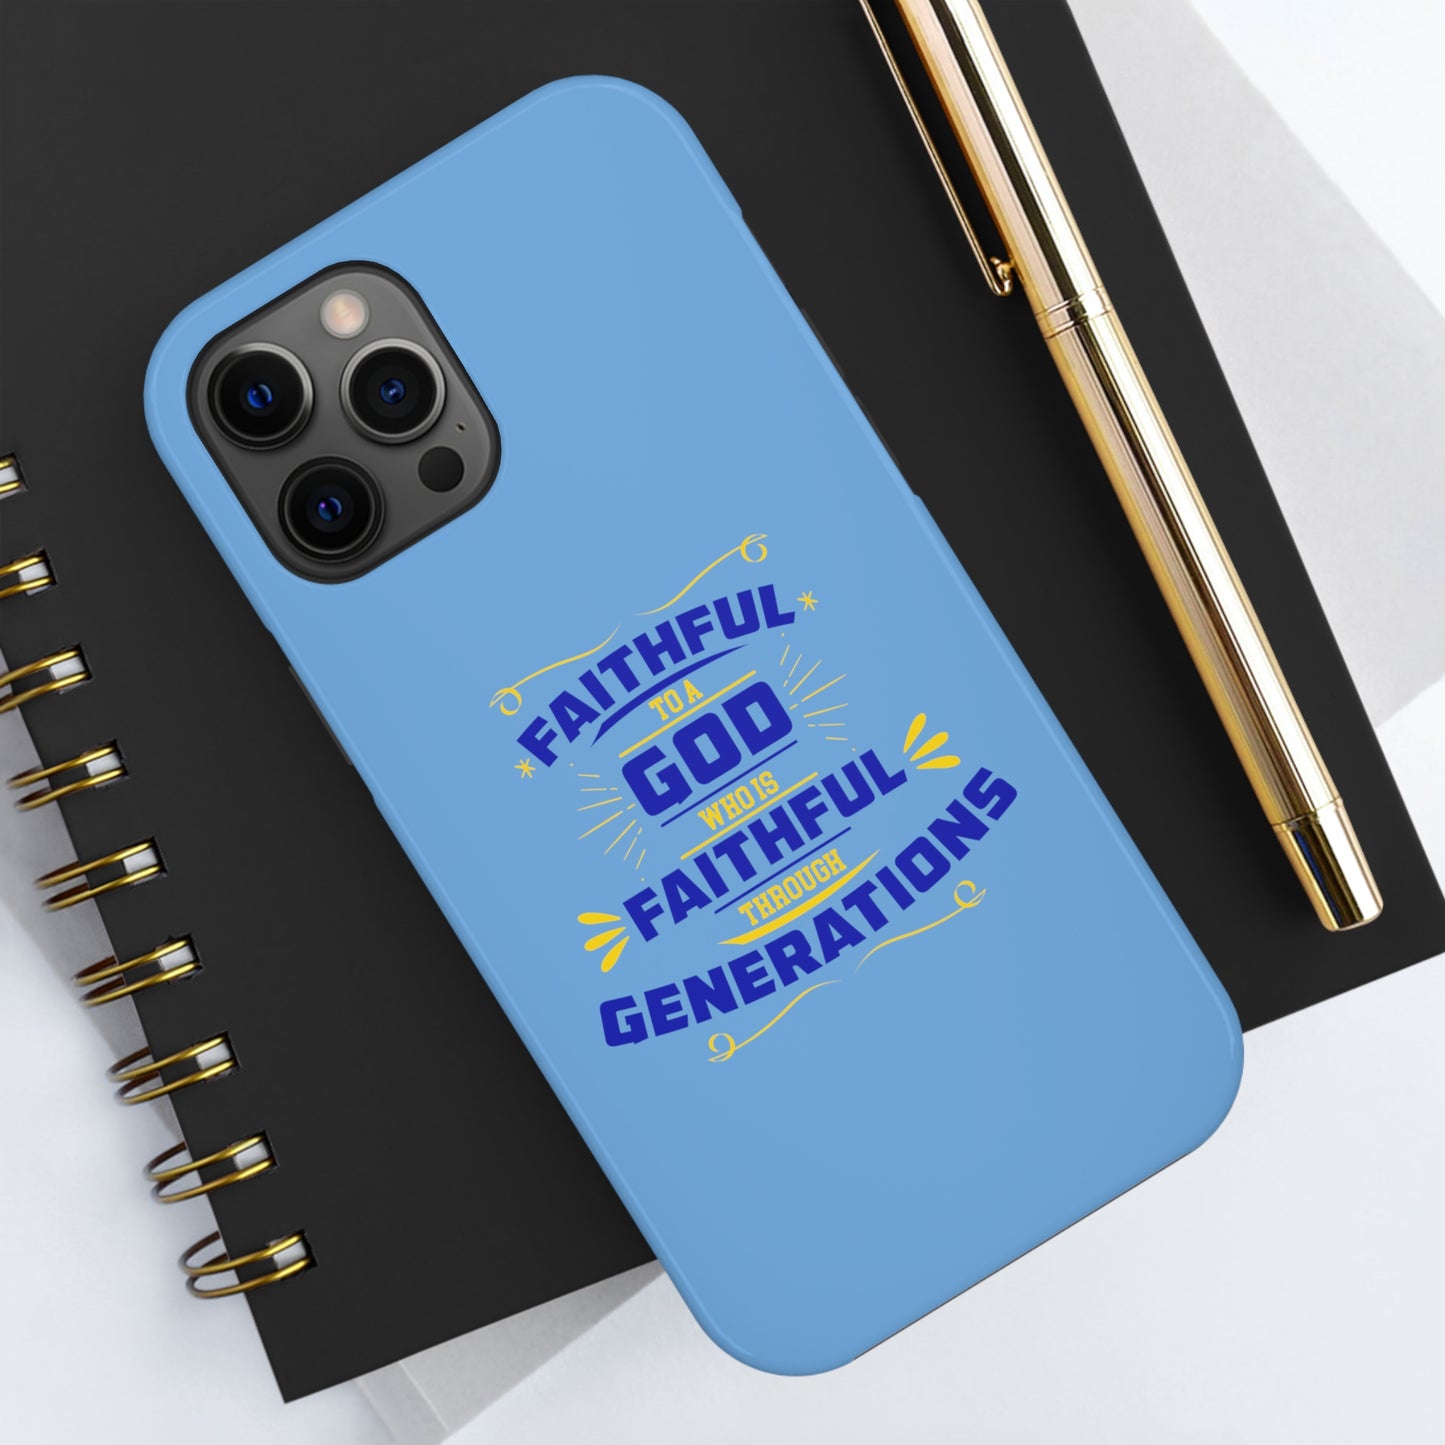 Faithful To A God Who Is Faithful Through Generations Tough Phone Cases, Case-Mate